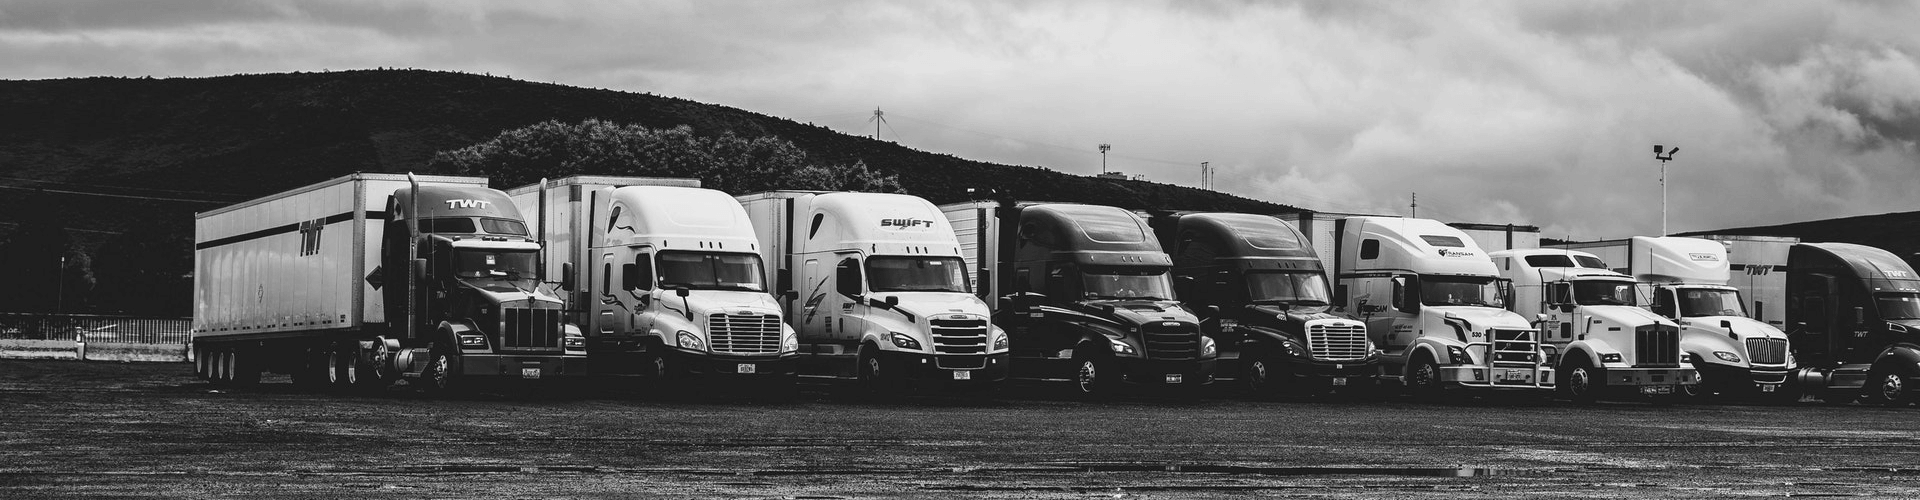 Line of tractor trailers parked in a gravel lot.